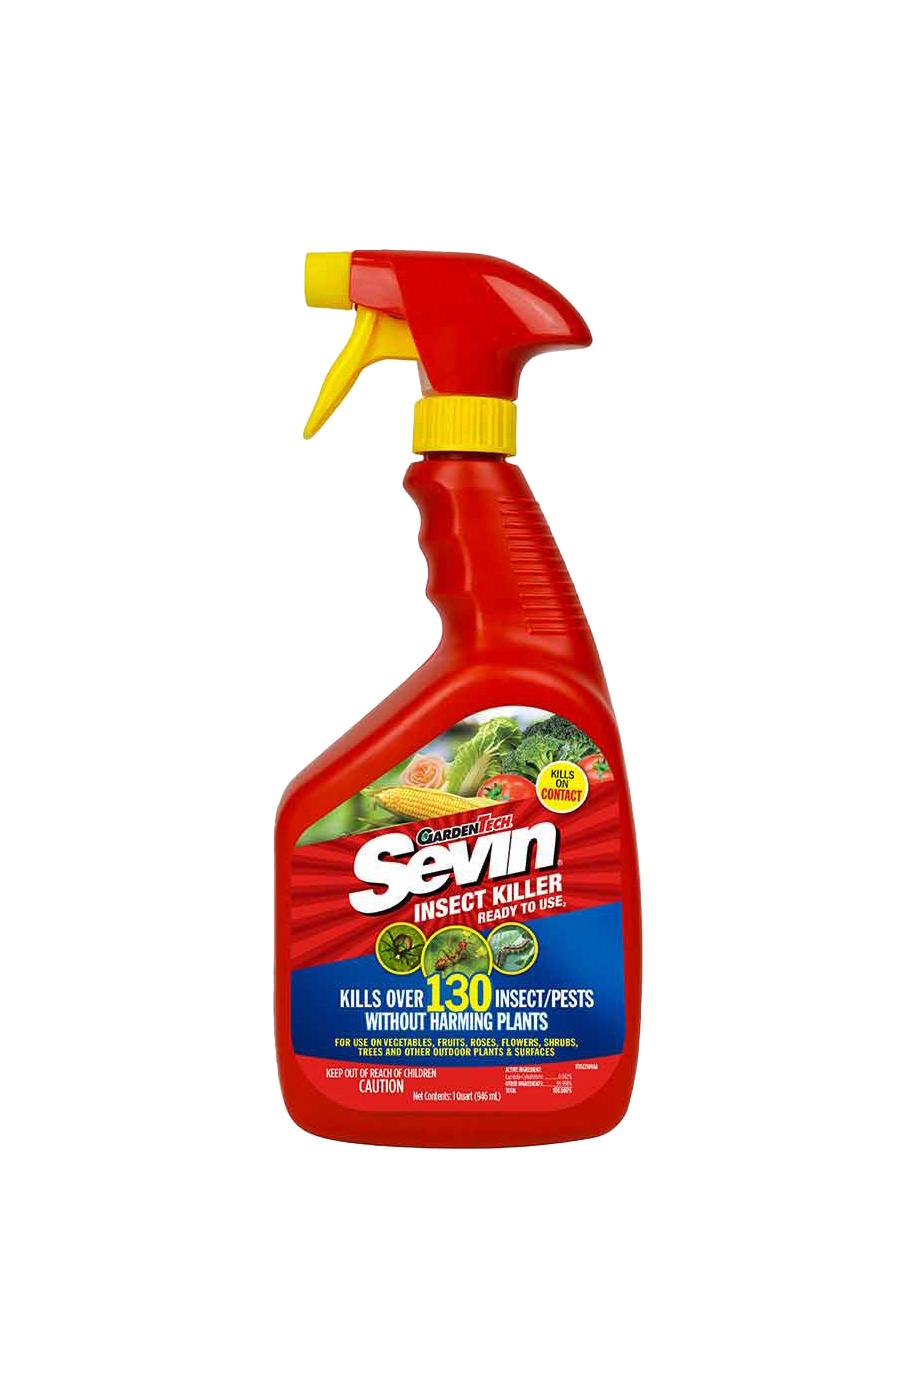 Garden Tech Sevin Insect Killer Ready To Use Spray; image 1 of 2